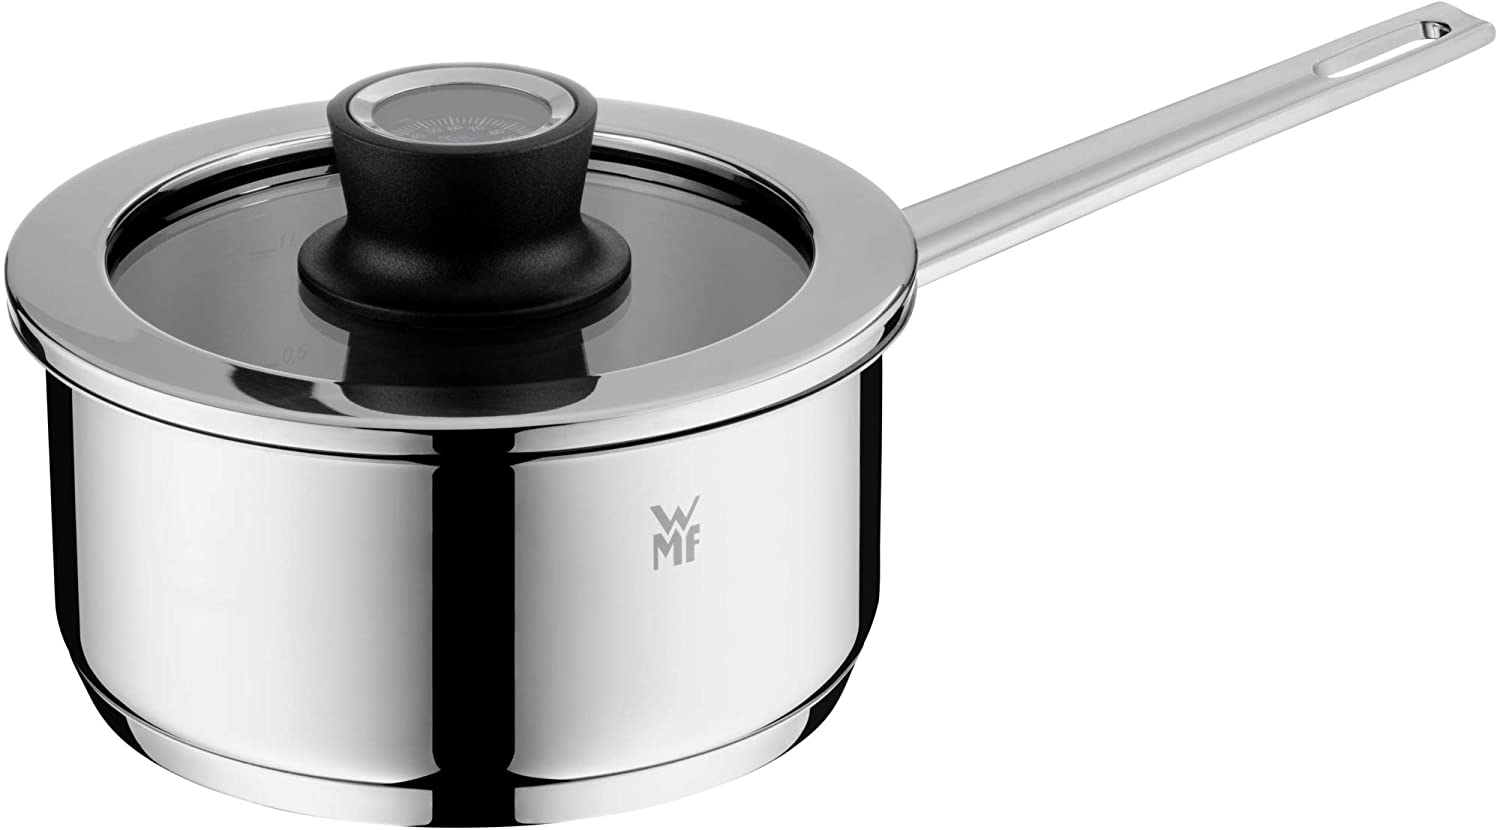 WMF VarioCuisine Saucepan 16 cm, Silence Glass Lid Thermometer, Cooking Pot 1.4 L, Cromargan Polished Stainless Steel, Saucepan Induction, Uncoated